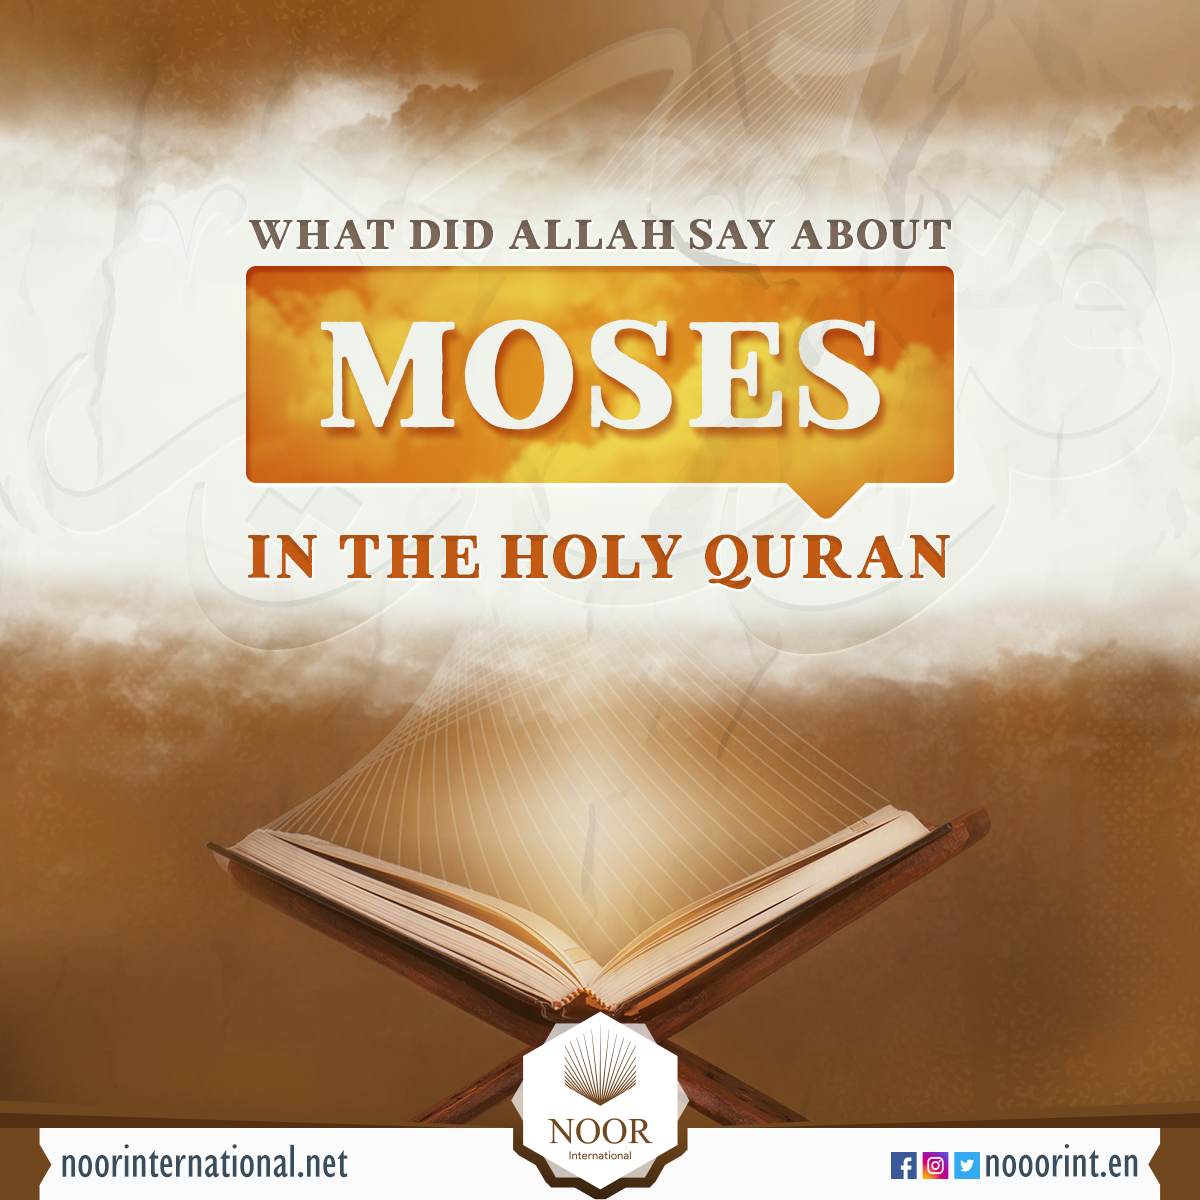 What did Allah say about Moses in the Holy Quran?